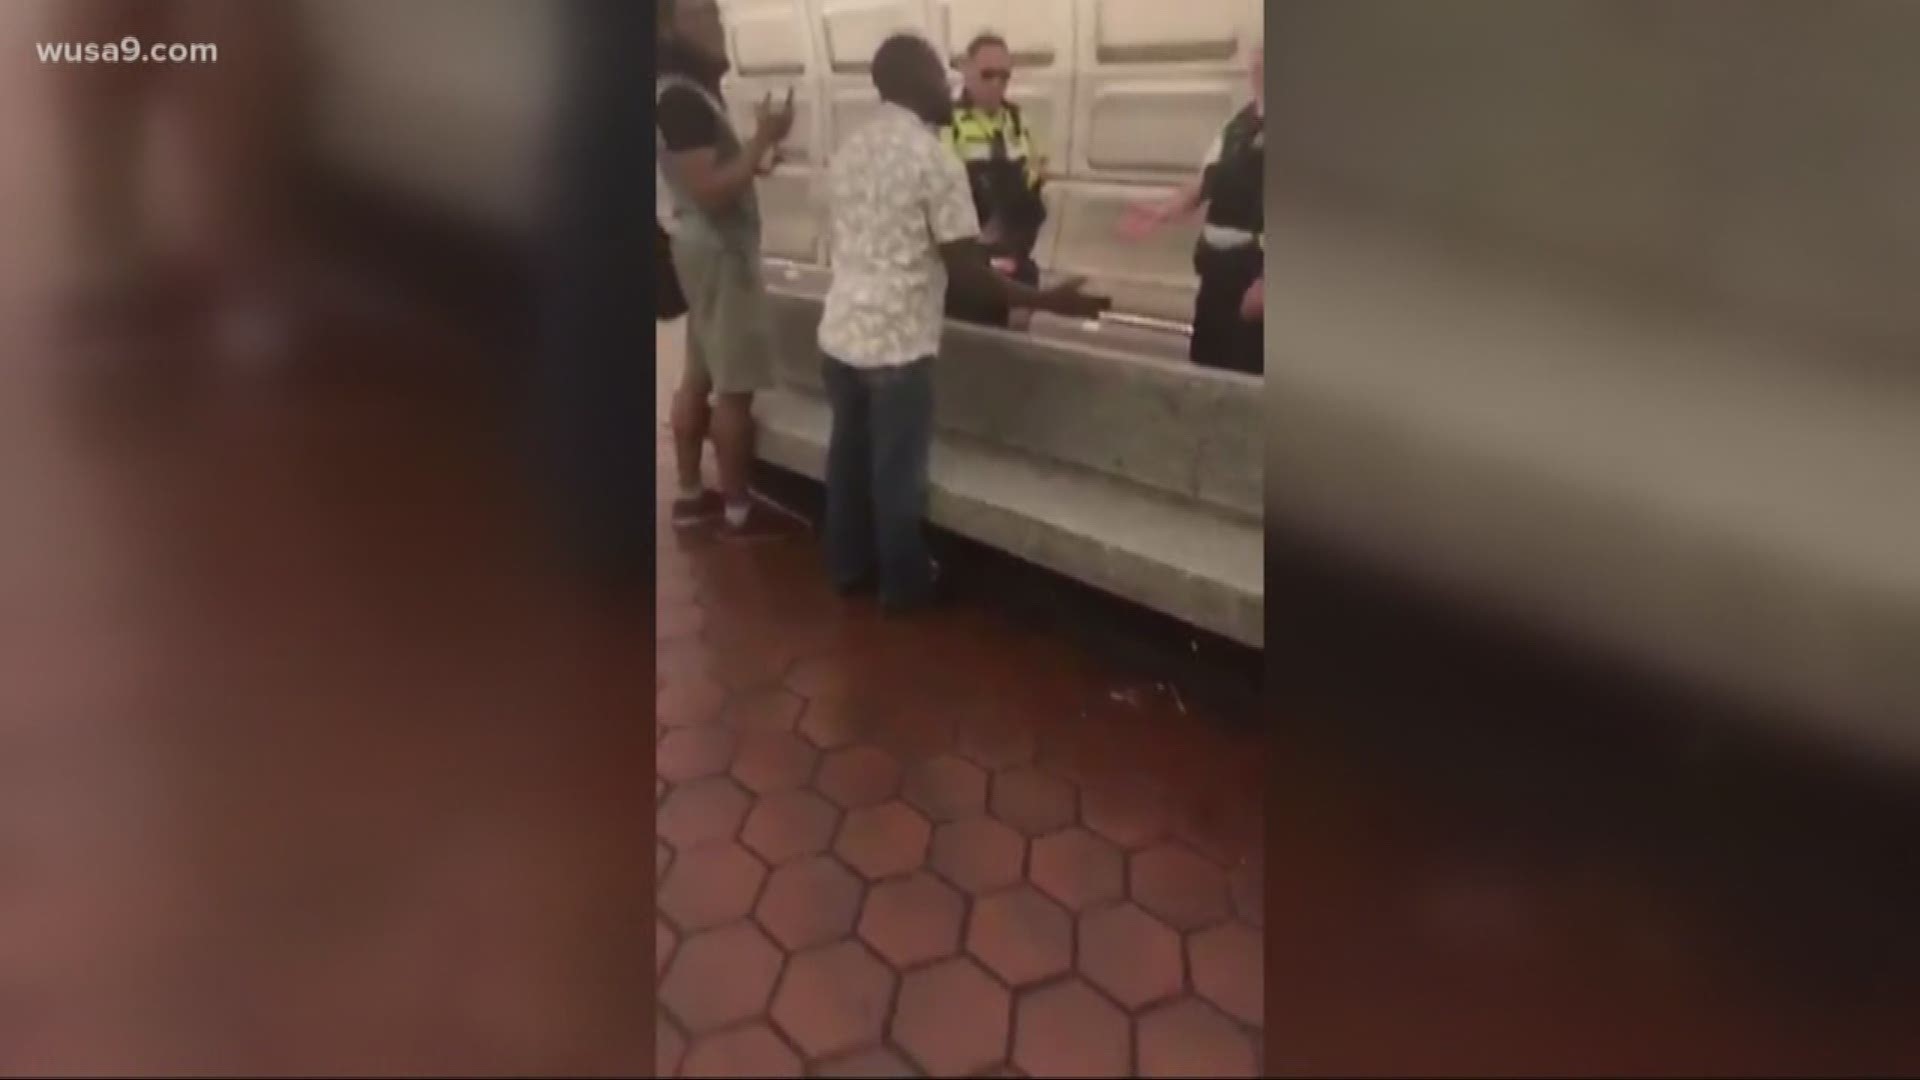 Metro Transit police tazing a man -- and tonight an internal investigation is underway. The disturbing video of Saturday's tazing at the U Street Metro Station went viral on social media.